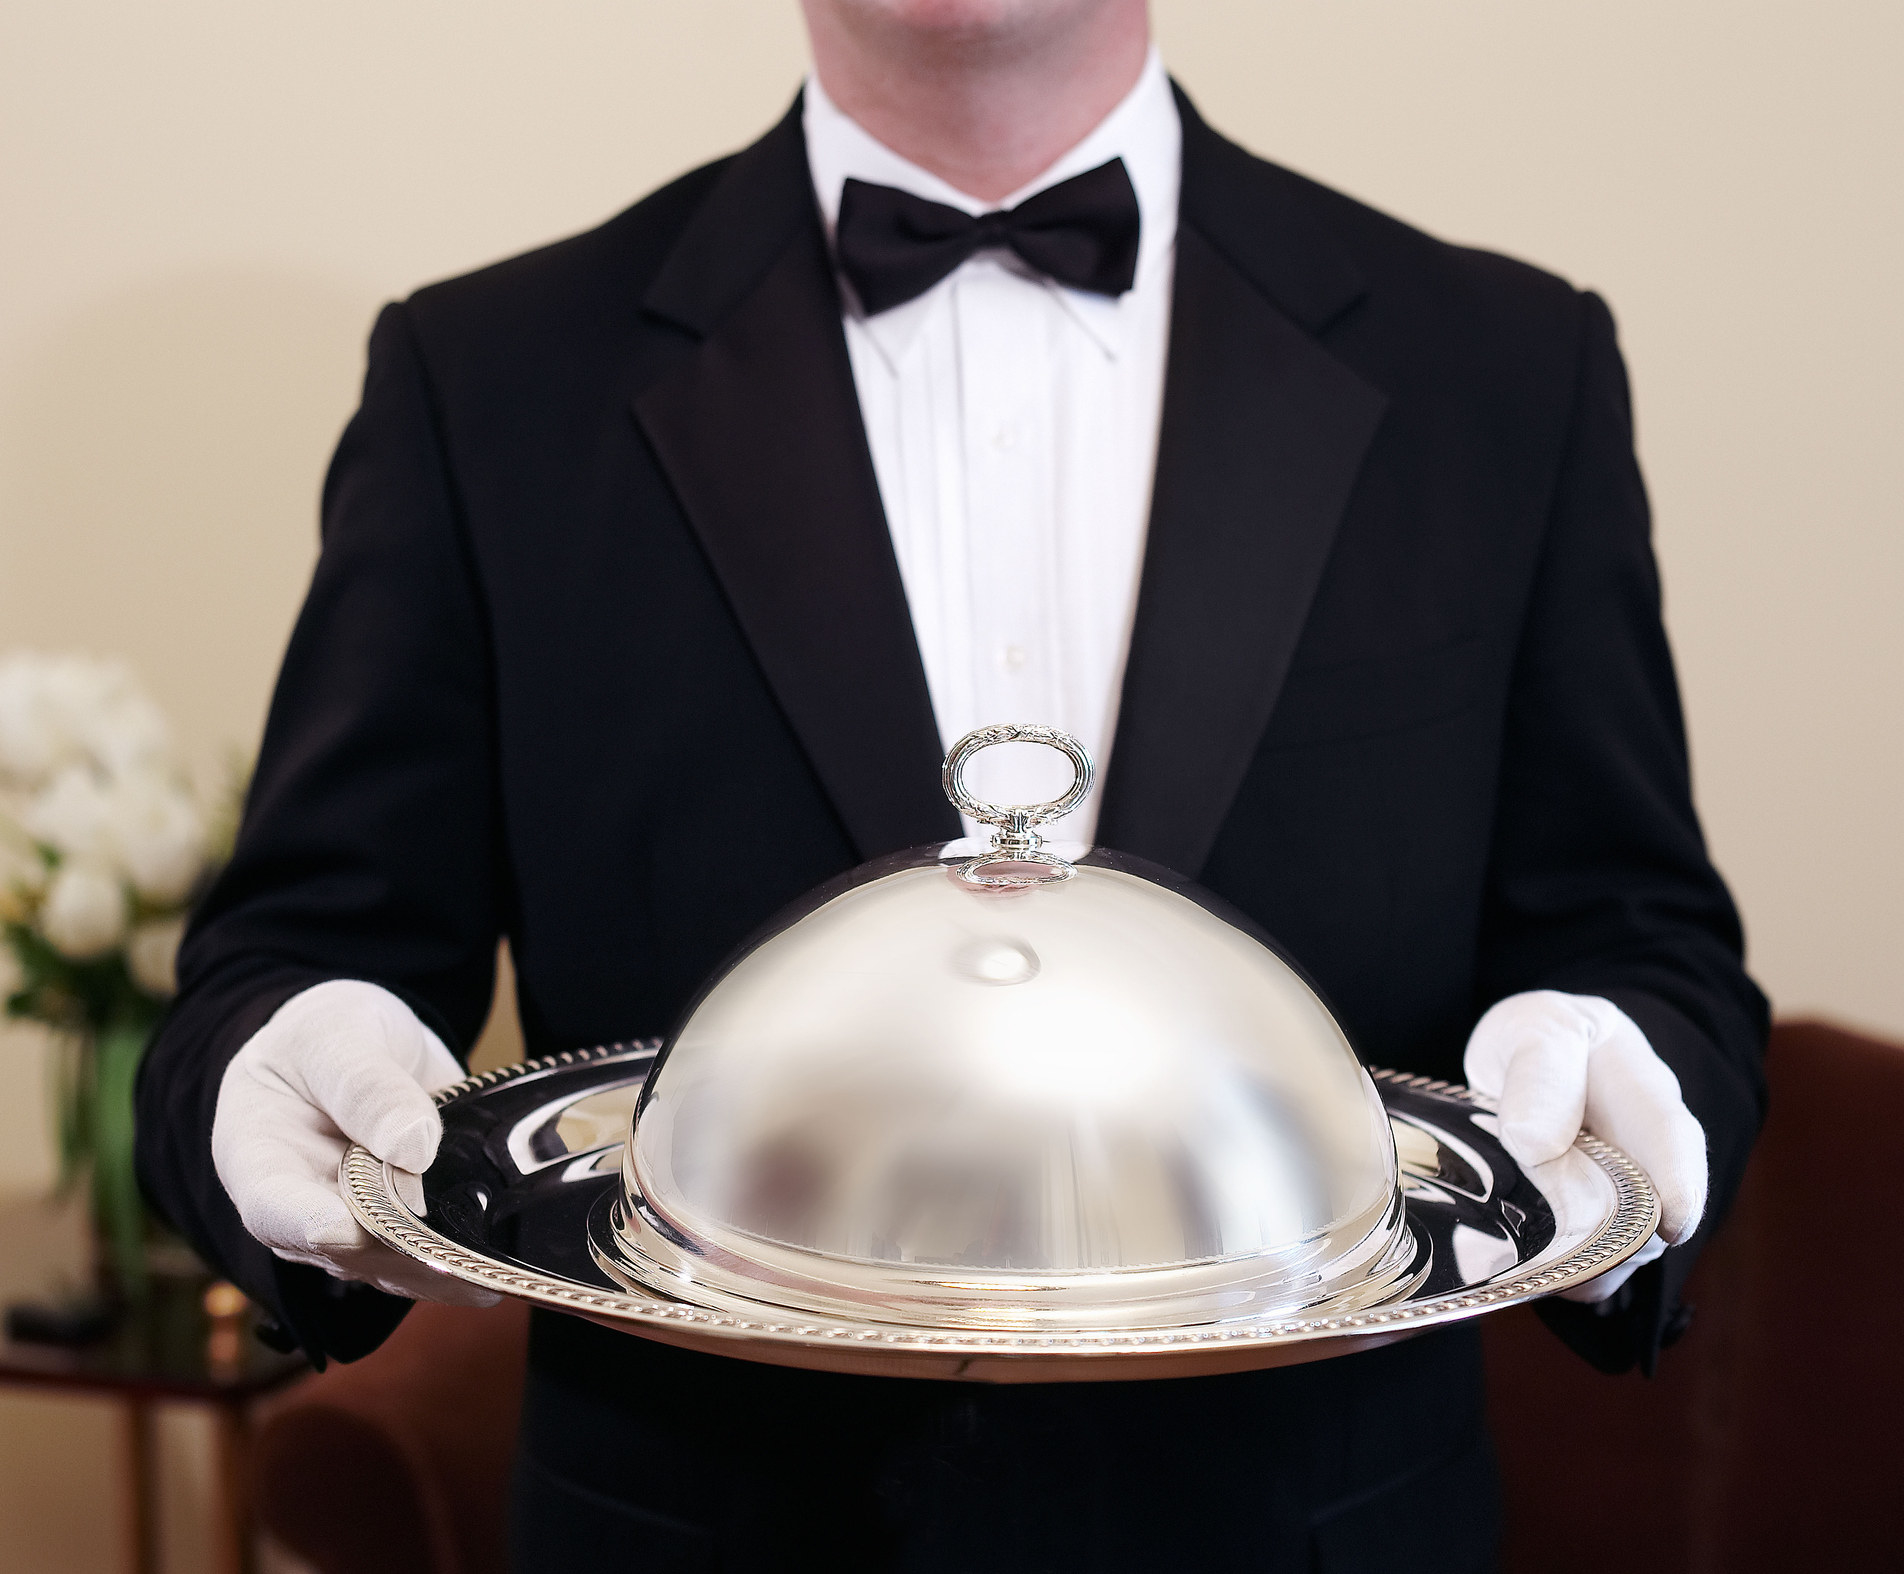 A butler holding a covered tray